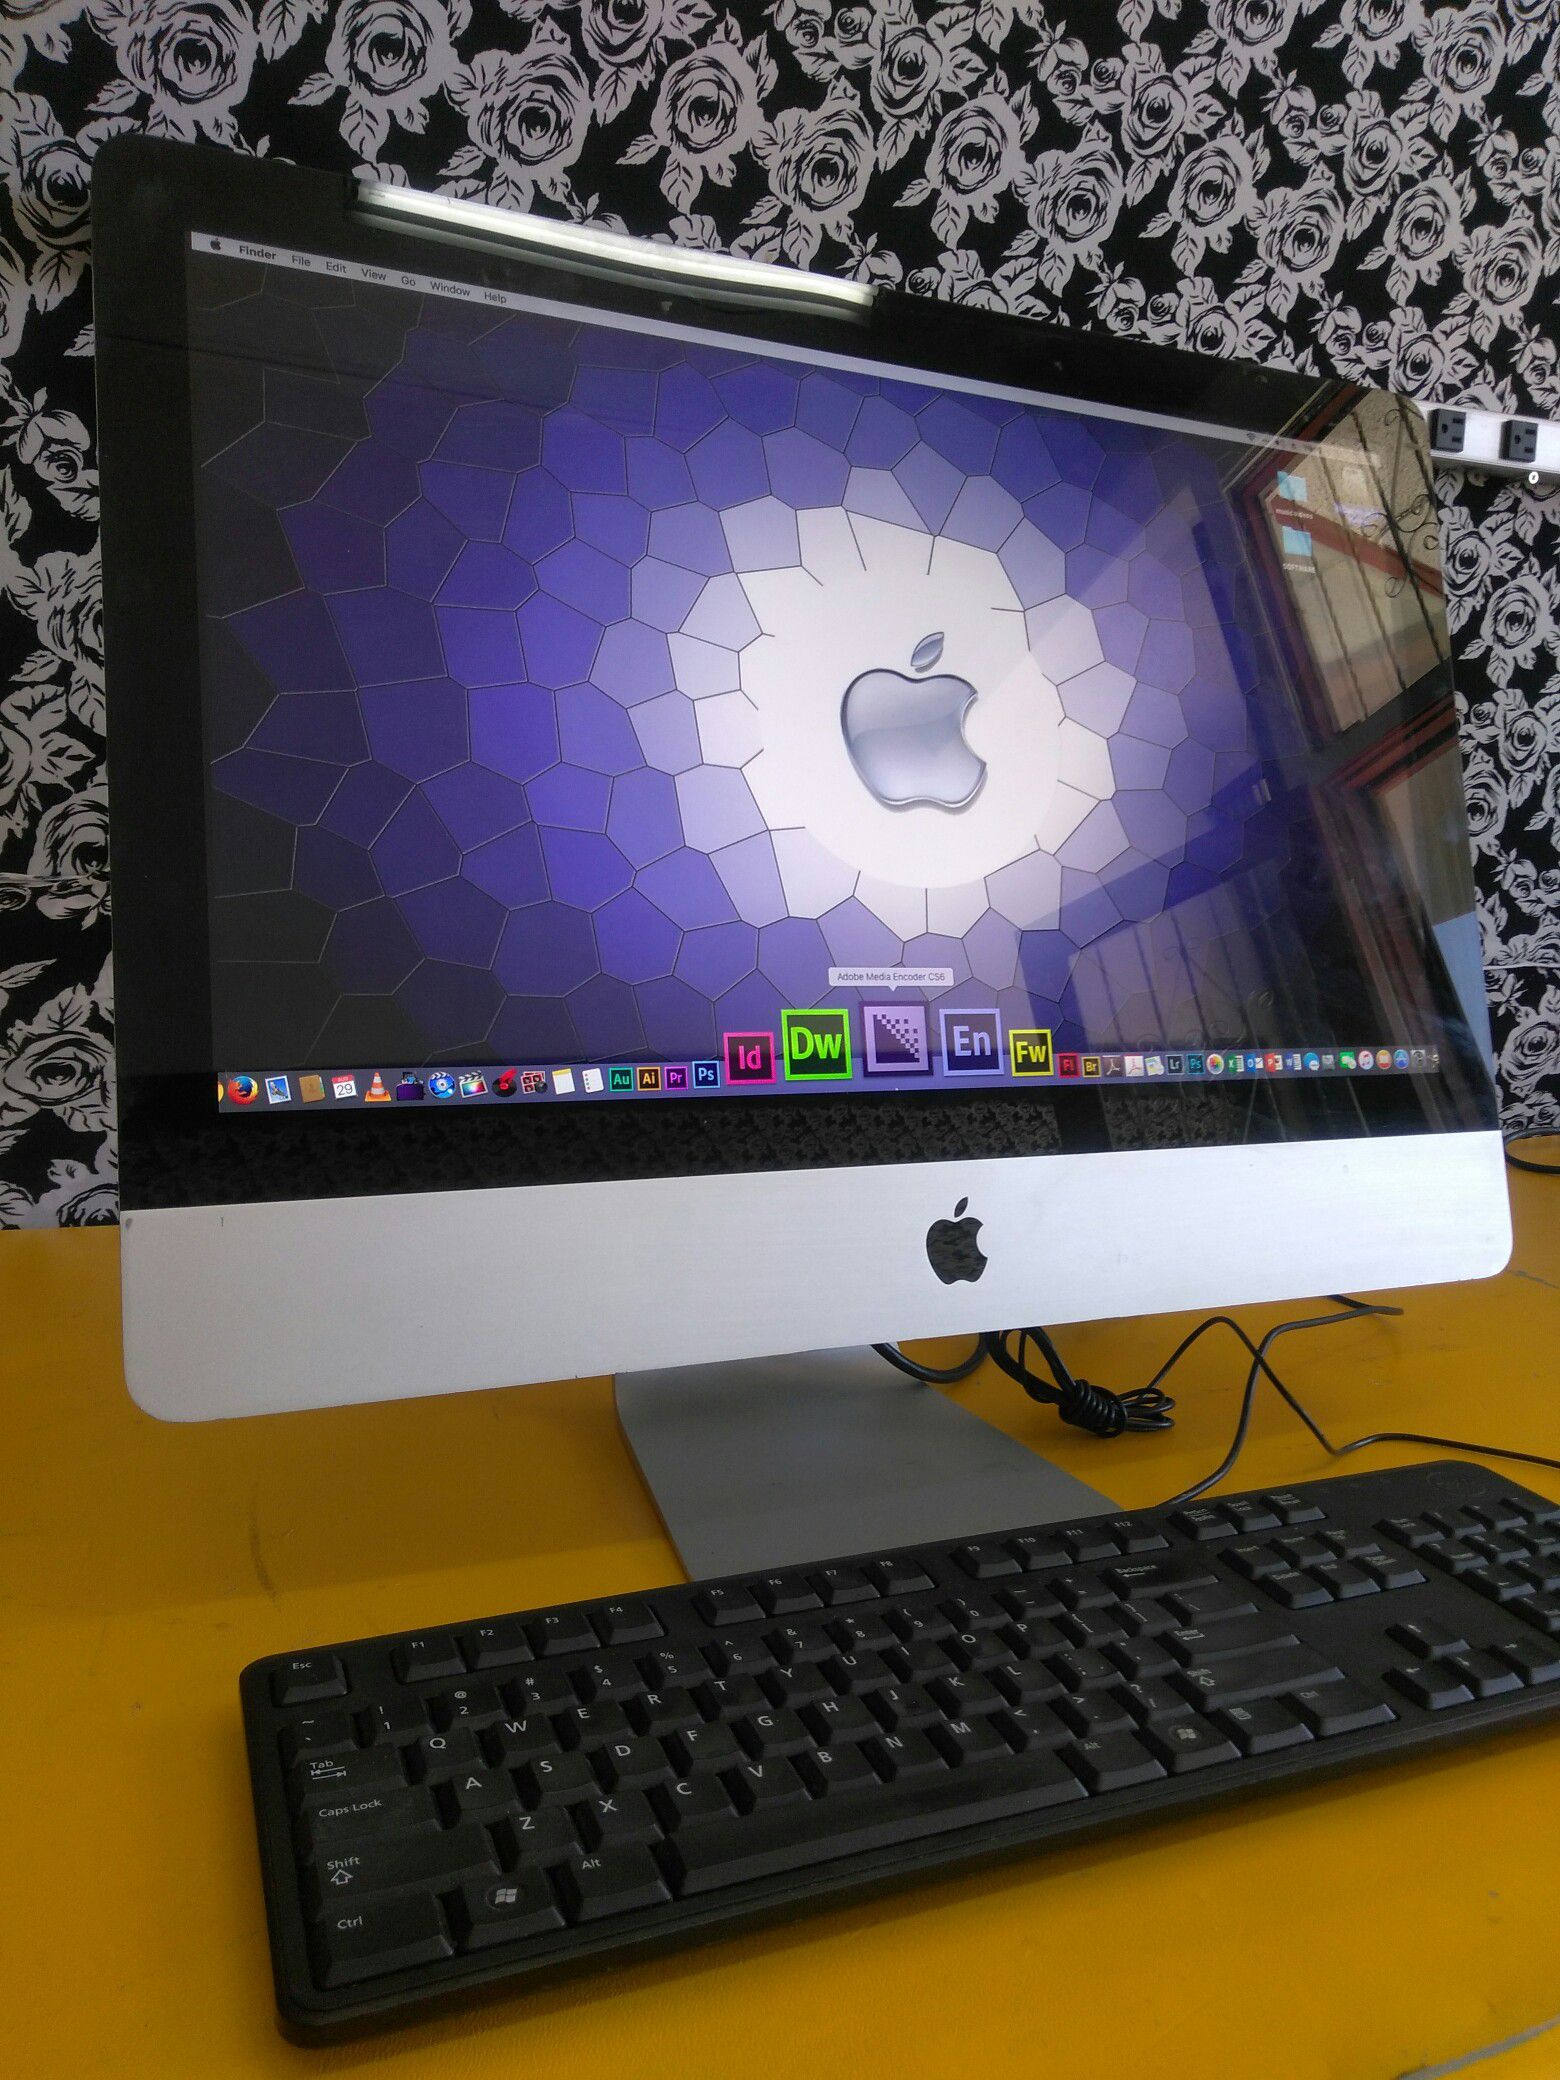 27" inch Widescreen - Perfect HD - Apple Imac ICORE 5 Quad, Complete - LOW $$$ $300